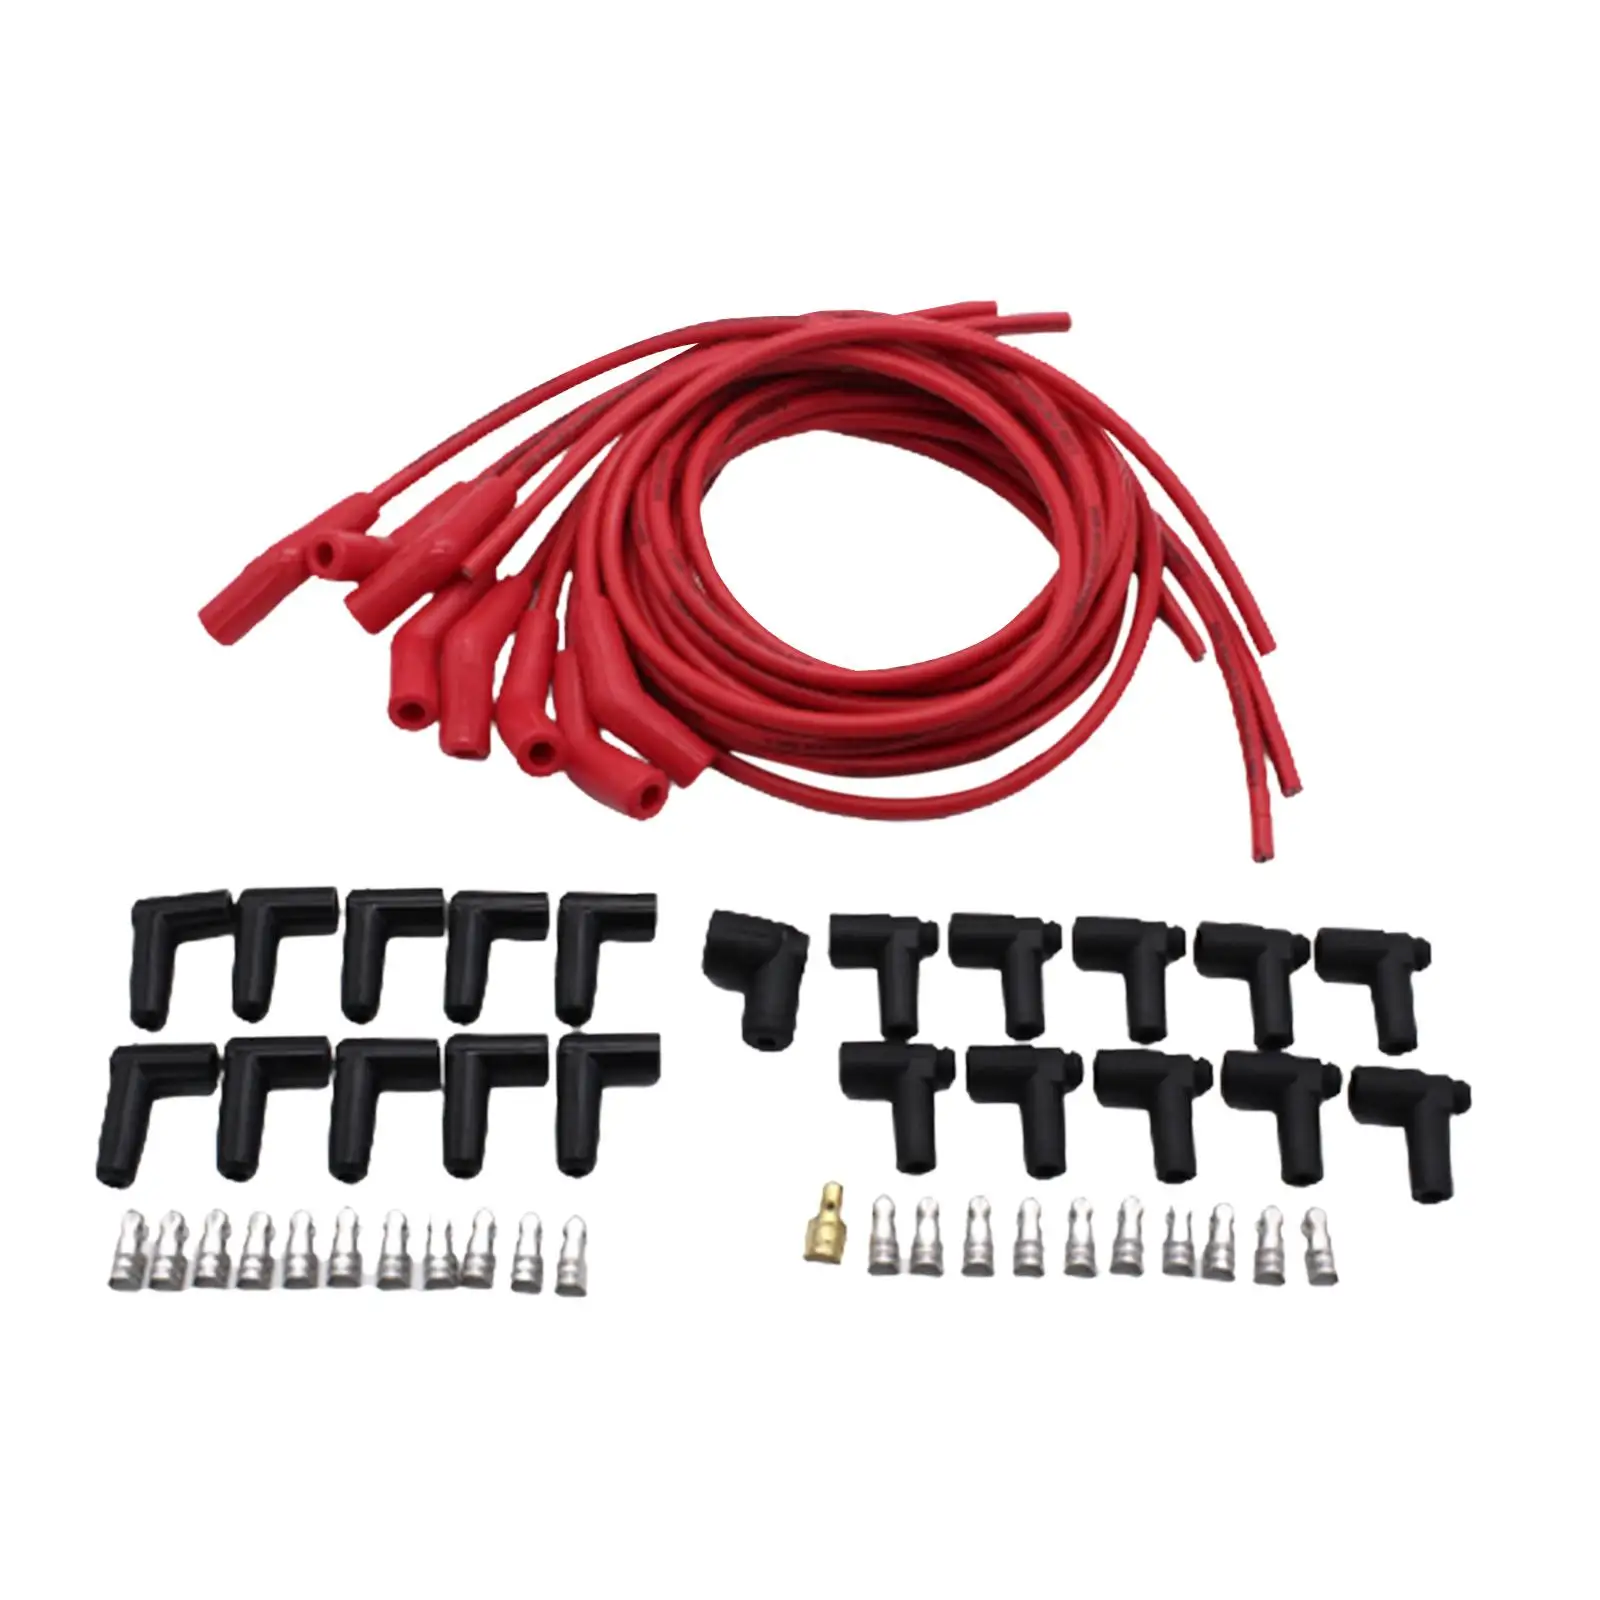 Spark Plug Wire Set Premium Durable Replaces Car Accessories Universal Red with 45/135 Spark Plug Boot for Mopar